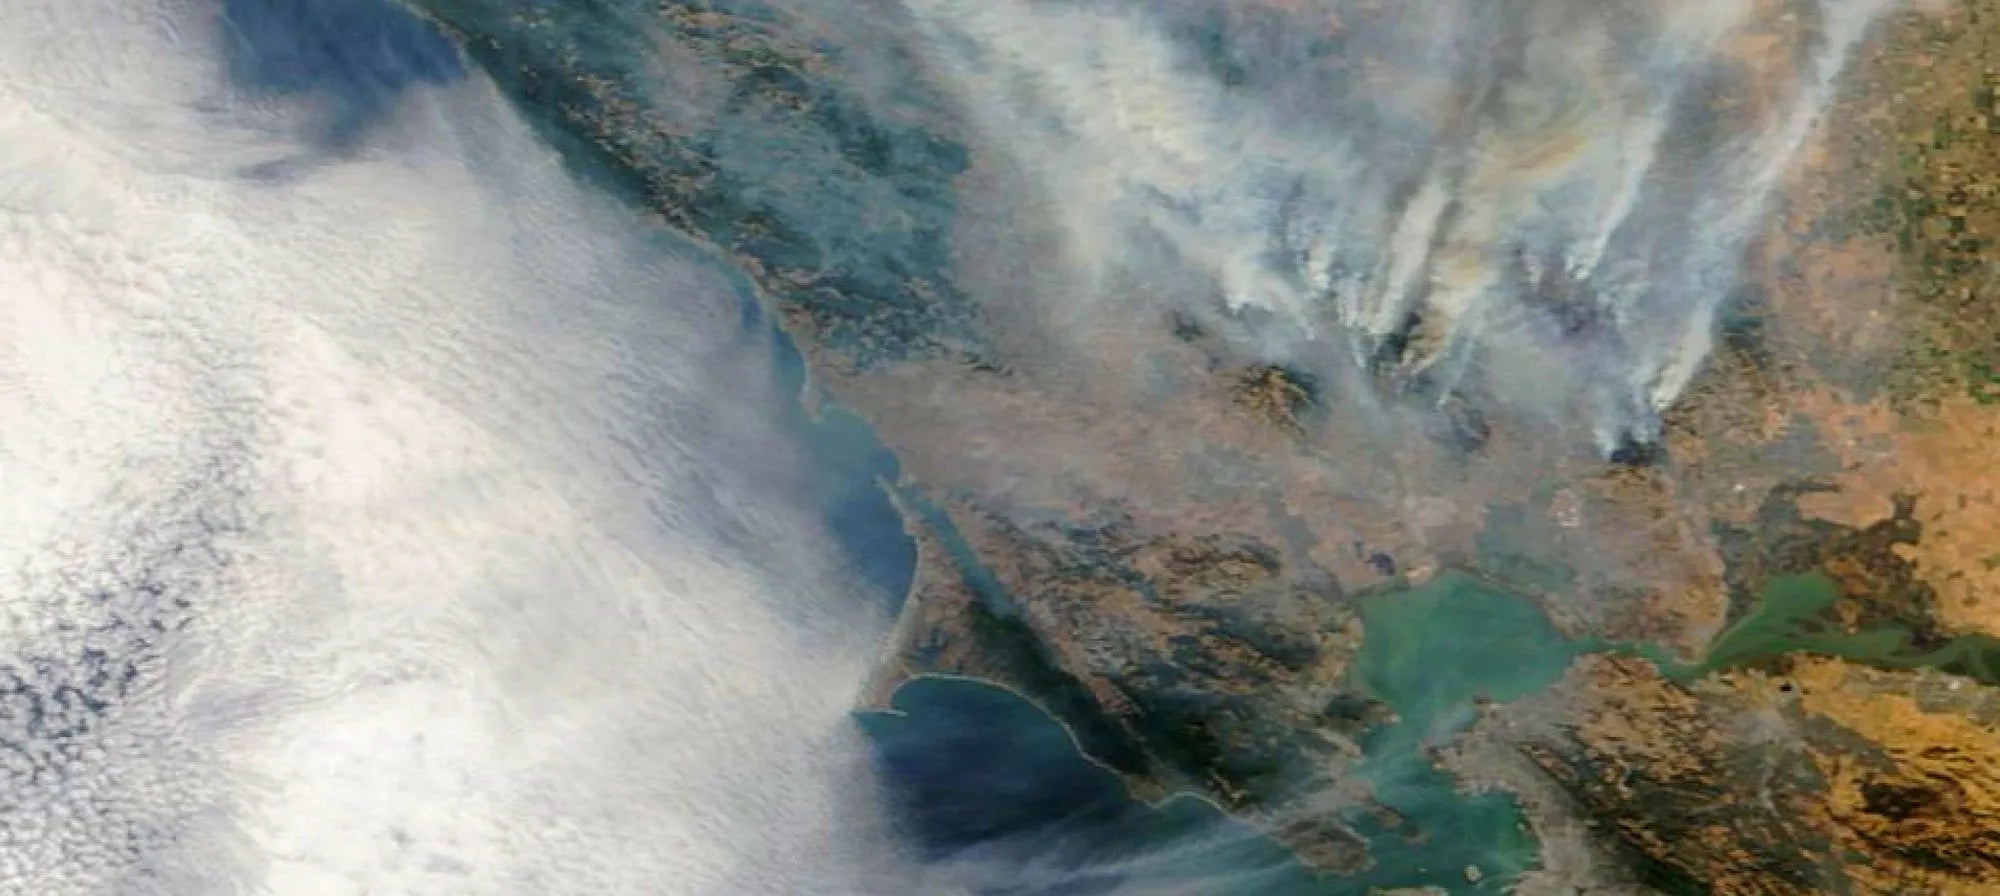 North Bay Fires